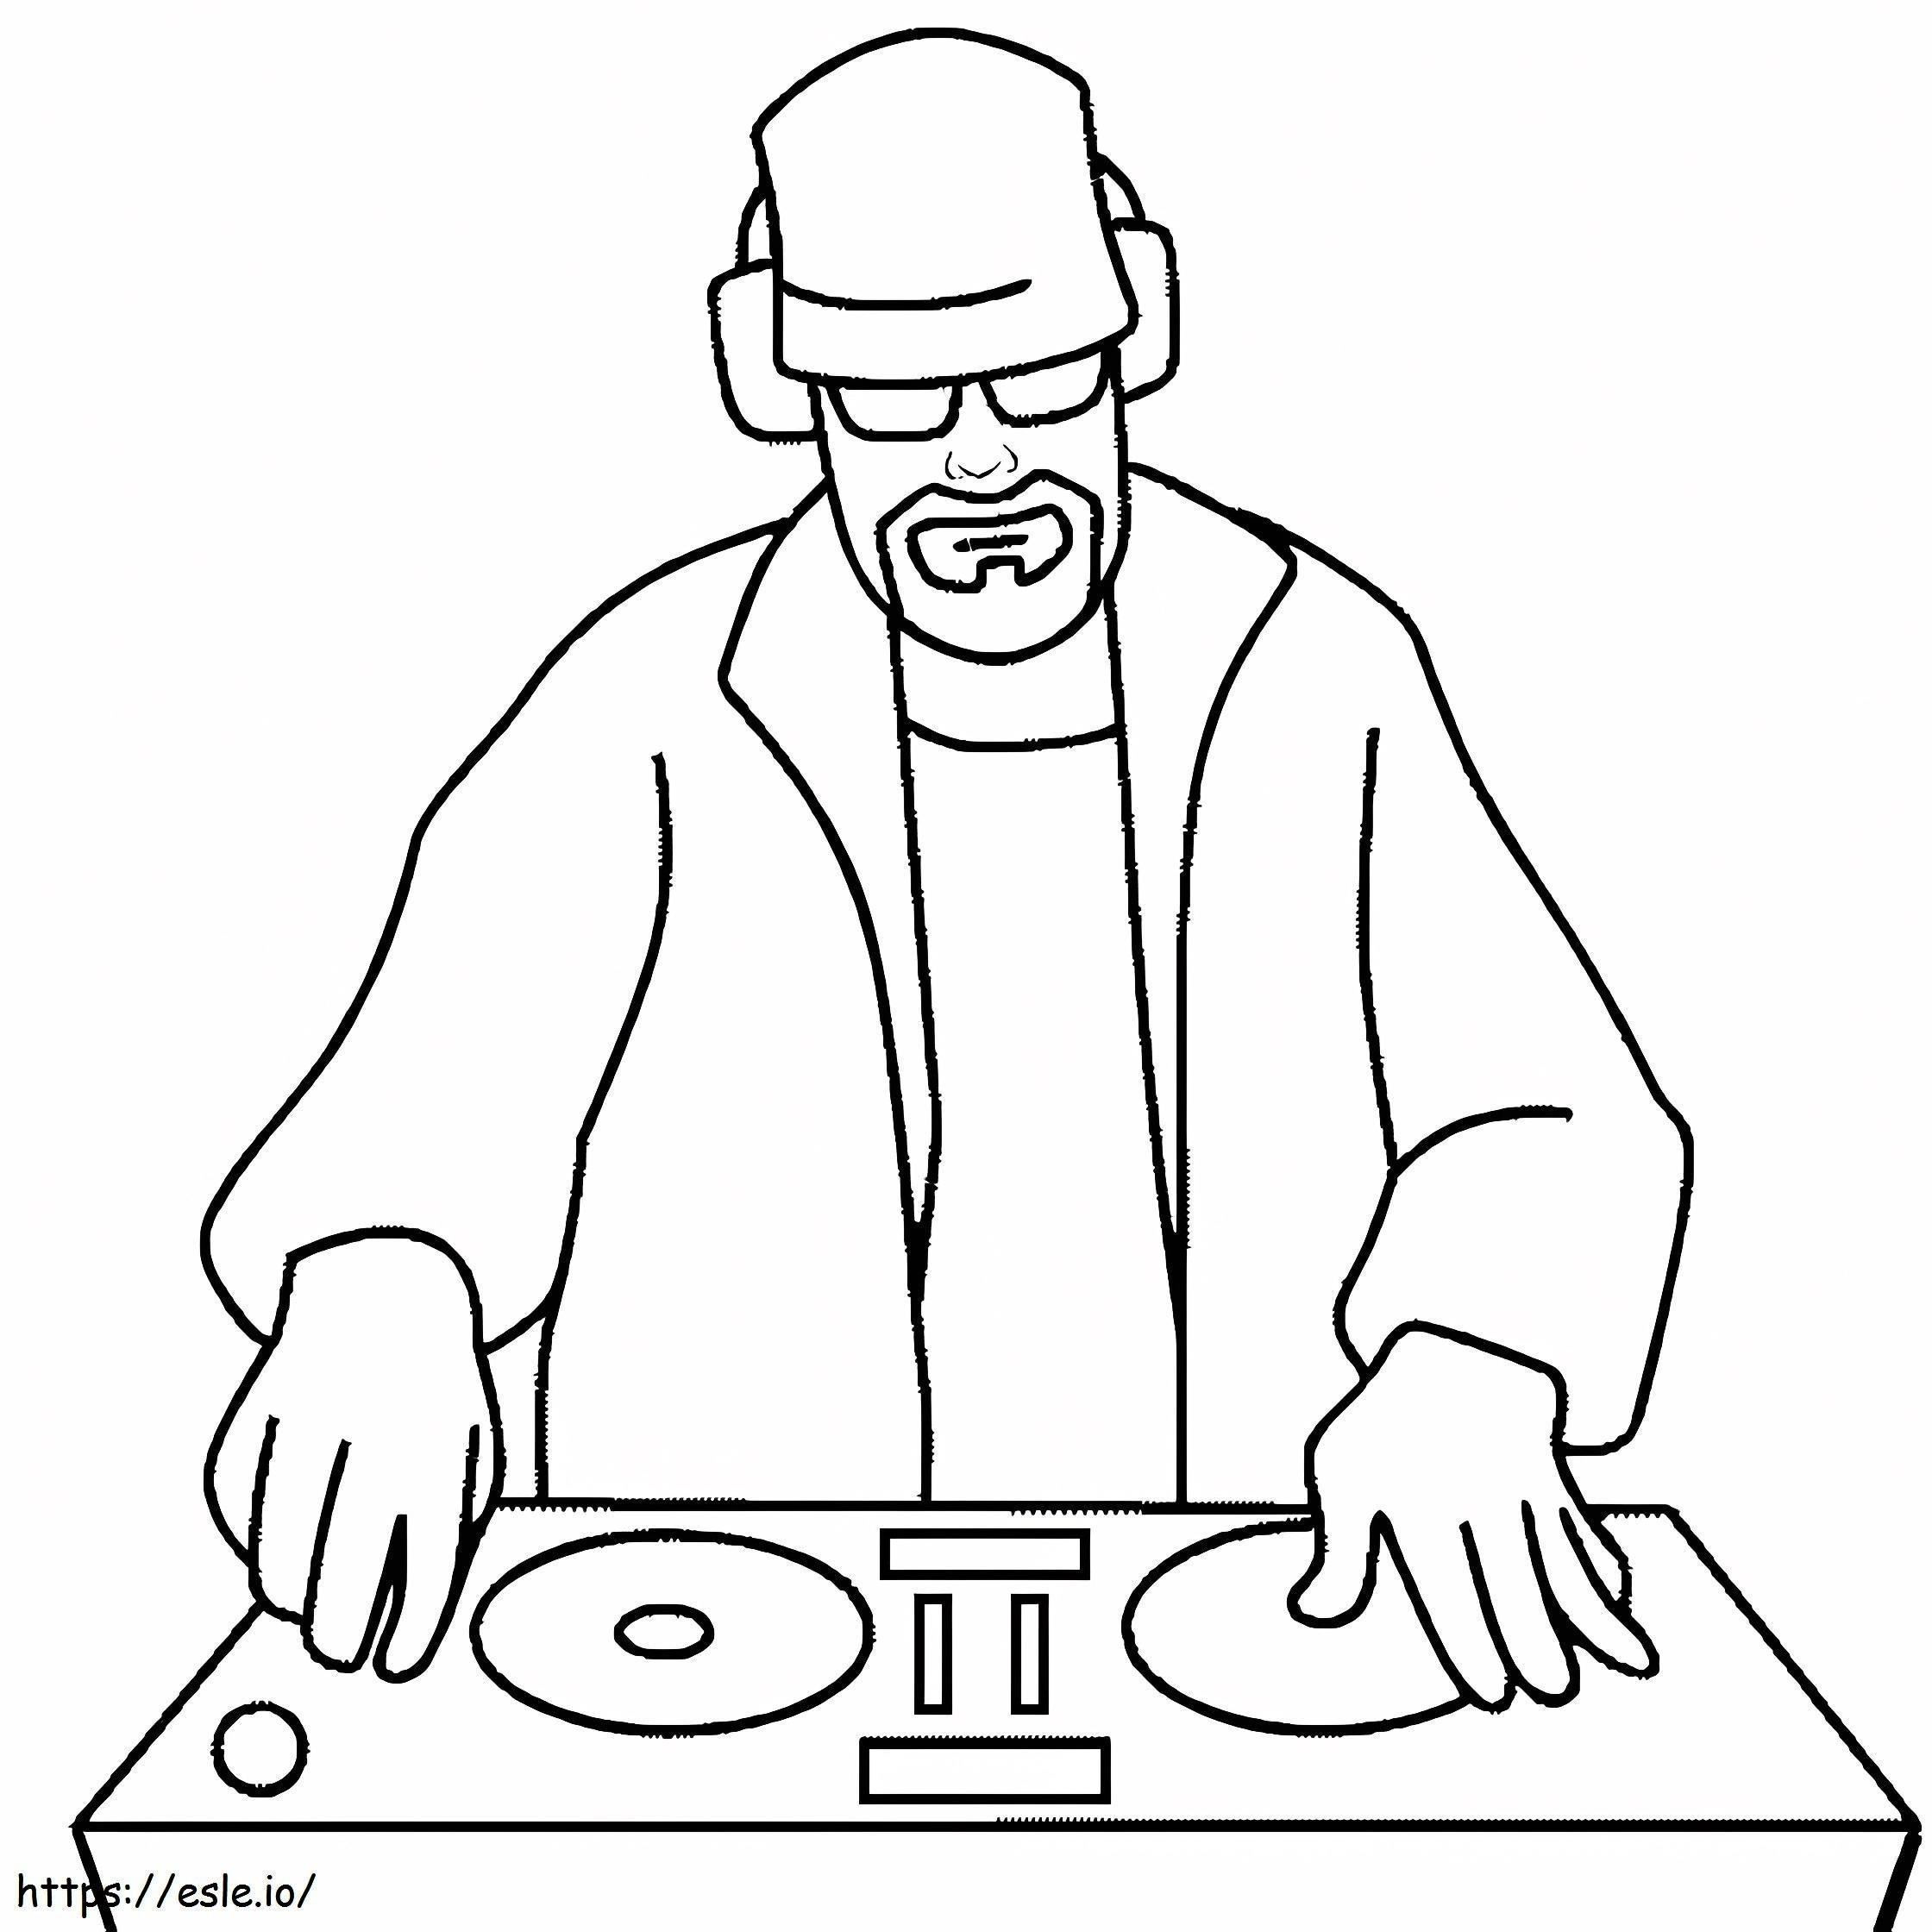 Amazing Dj coloring page